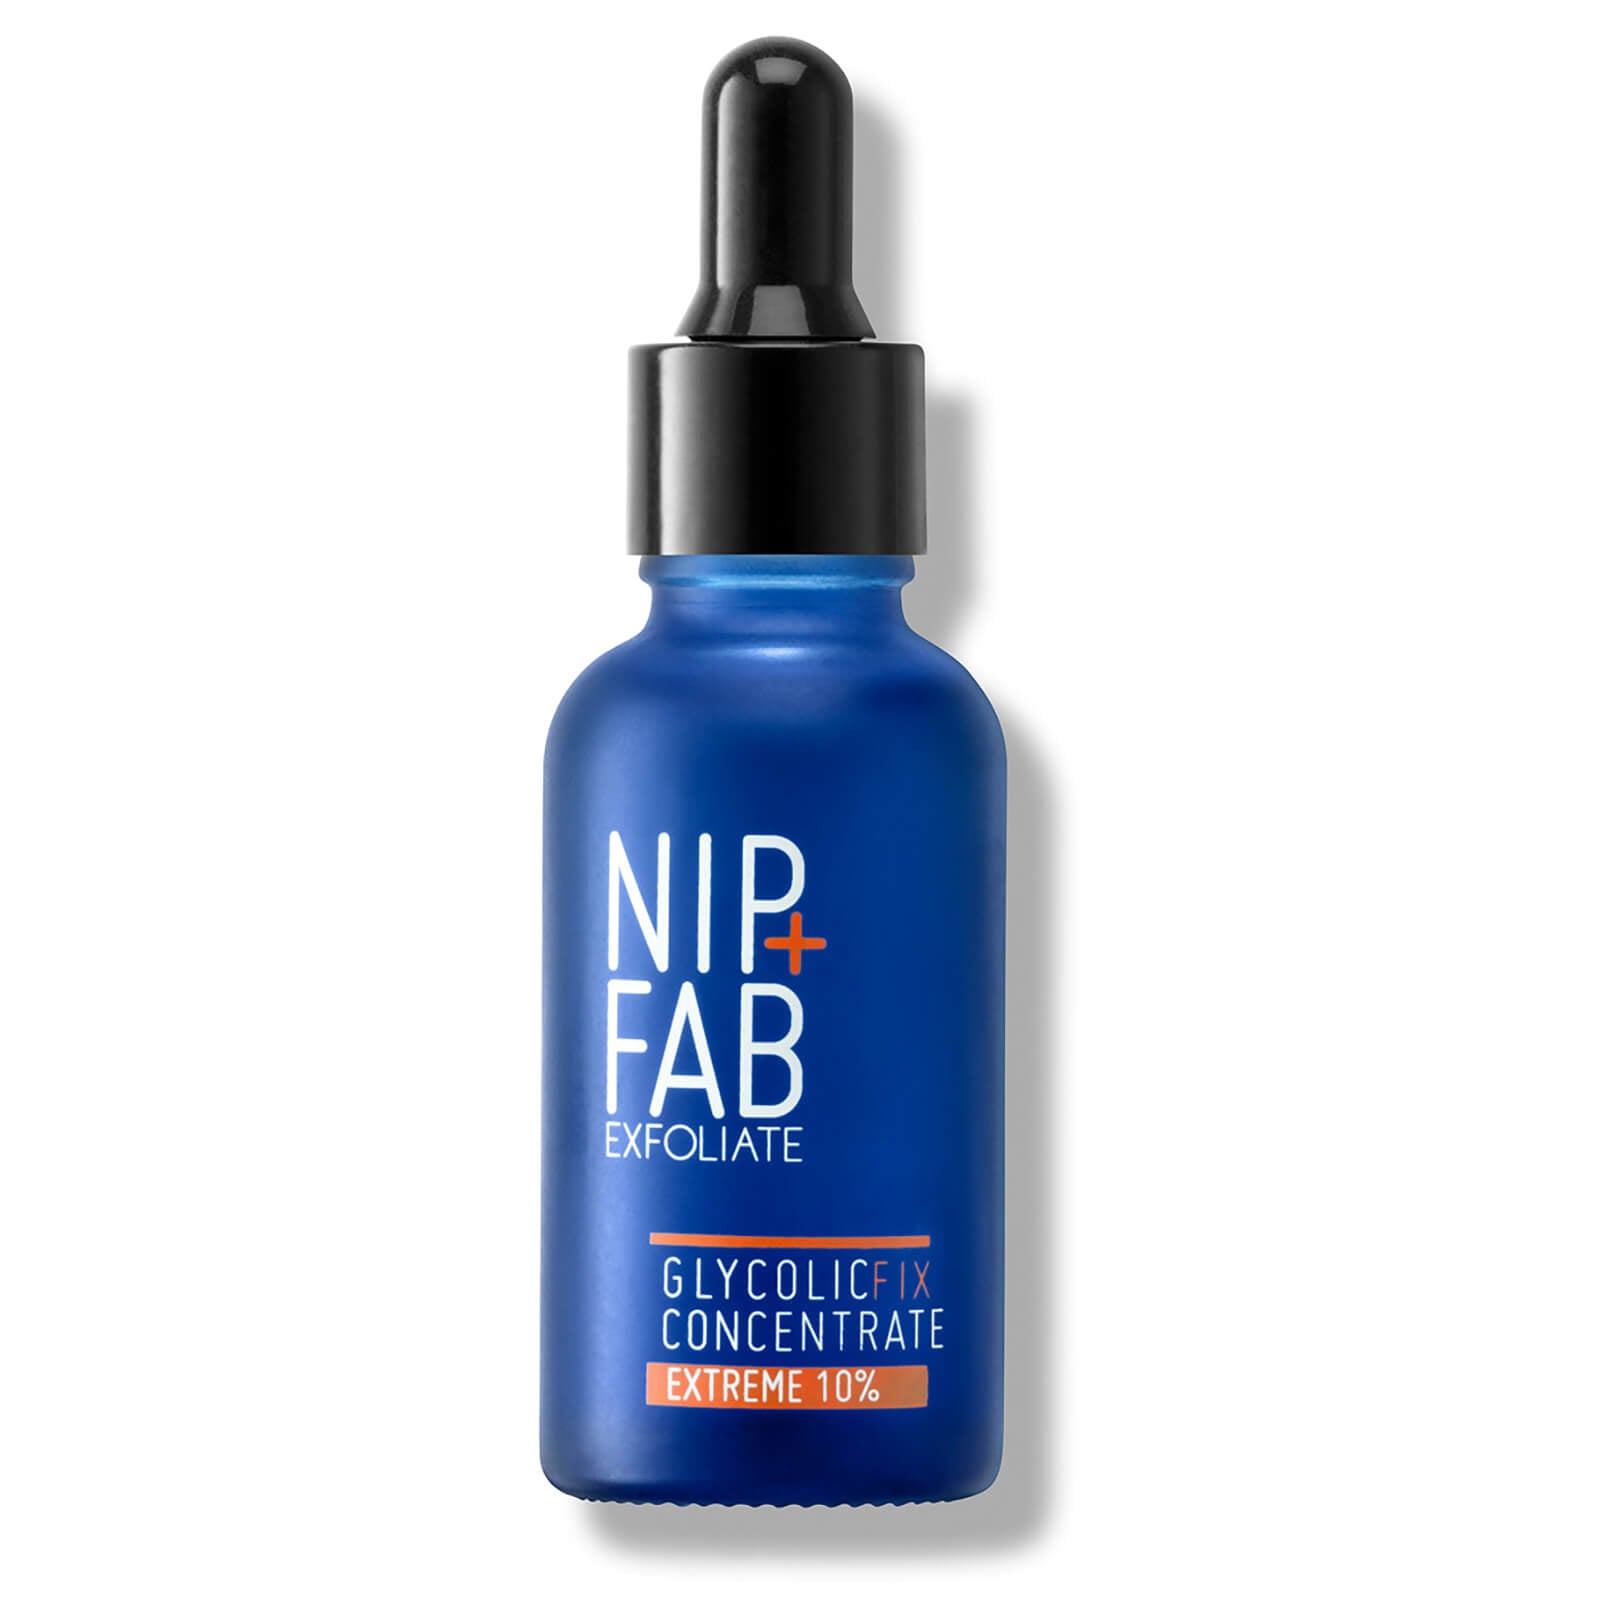 NIP+FAB Glycolic Fix Concentrate Extreme 10%